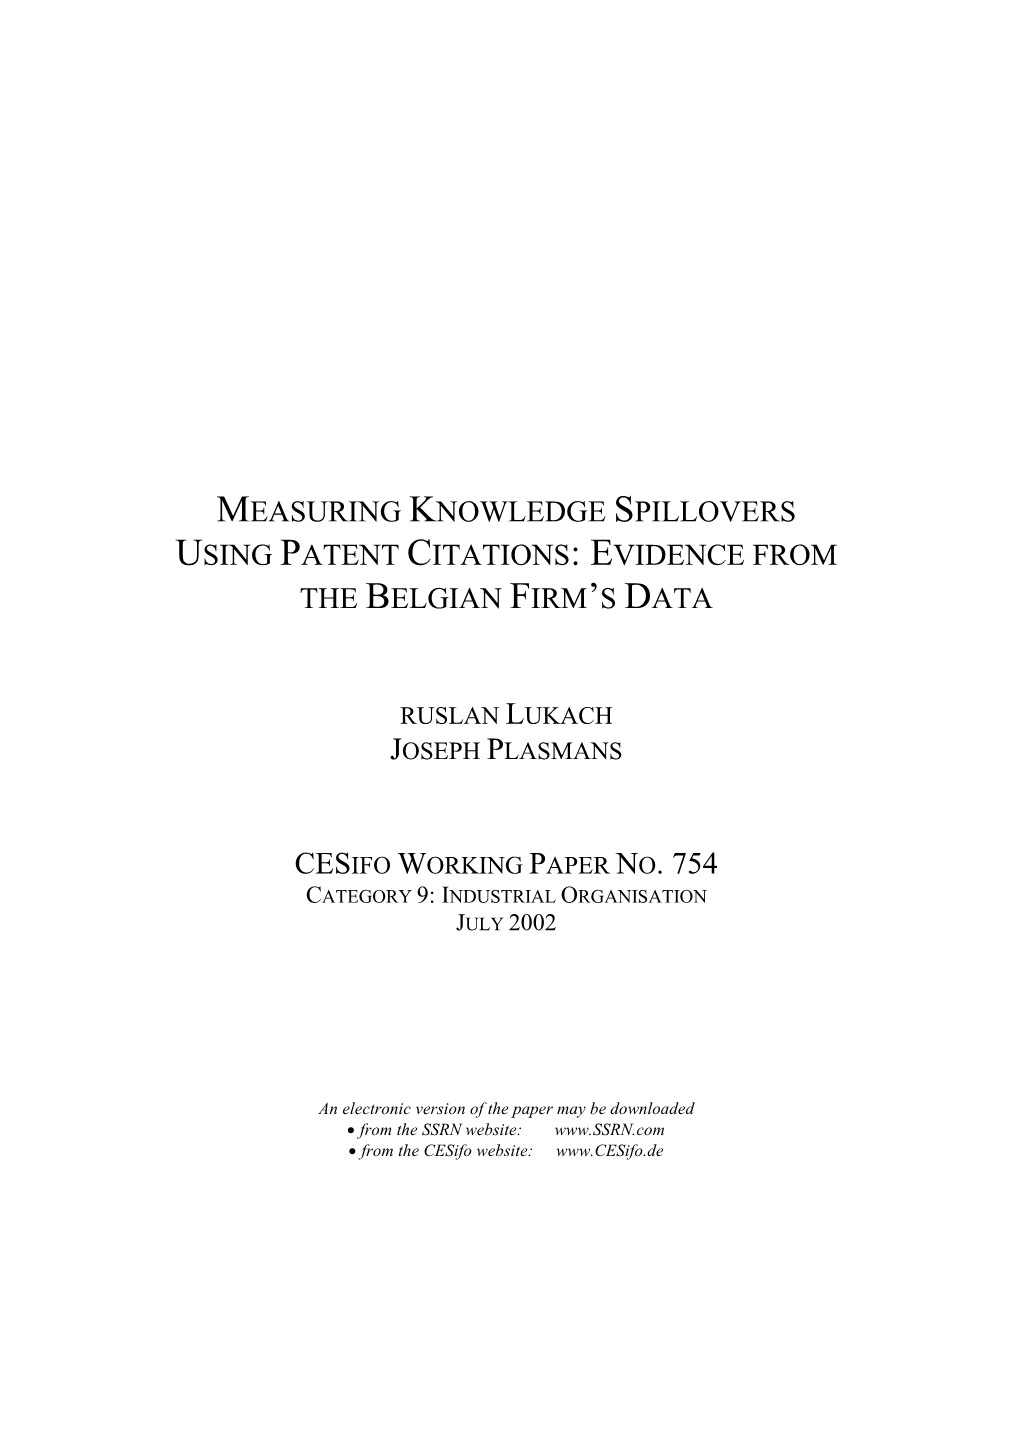 Measuring Knowledge Spillovers Using Patent Citations: Evidence from the Belgian Firm's Data